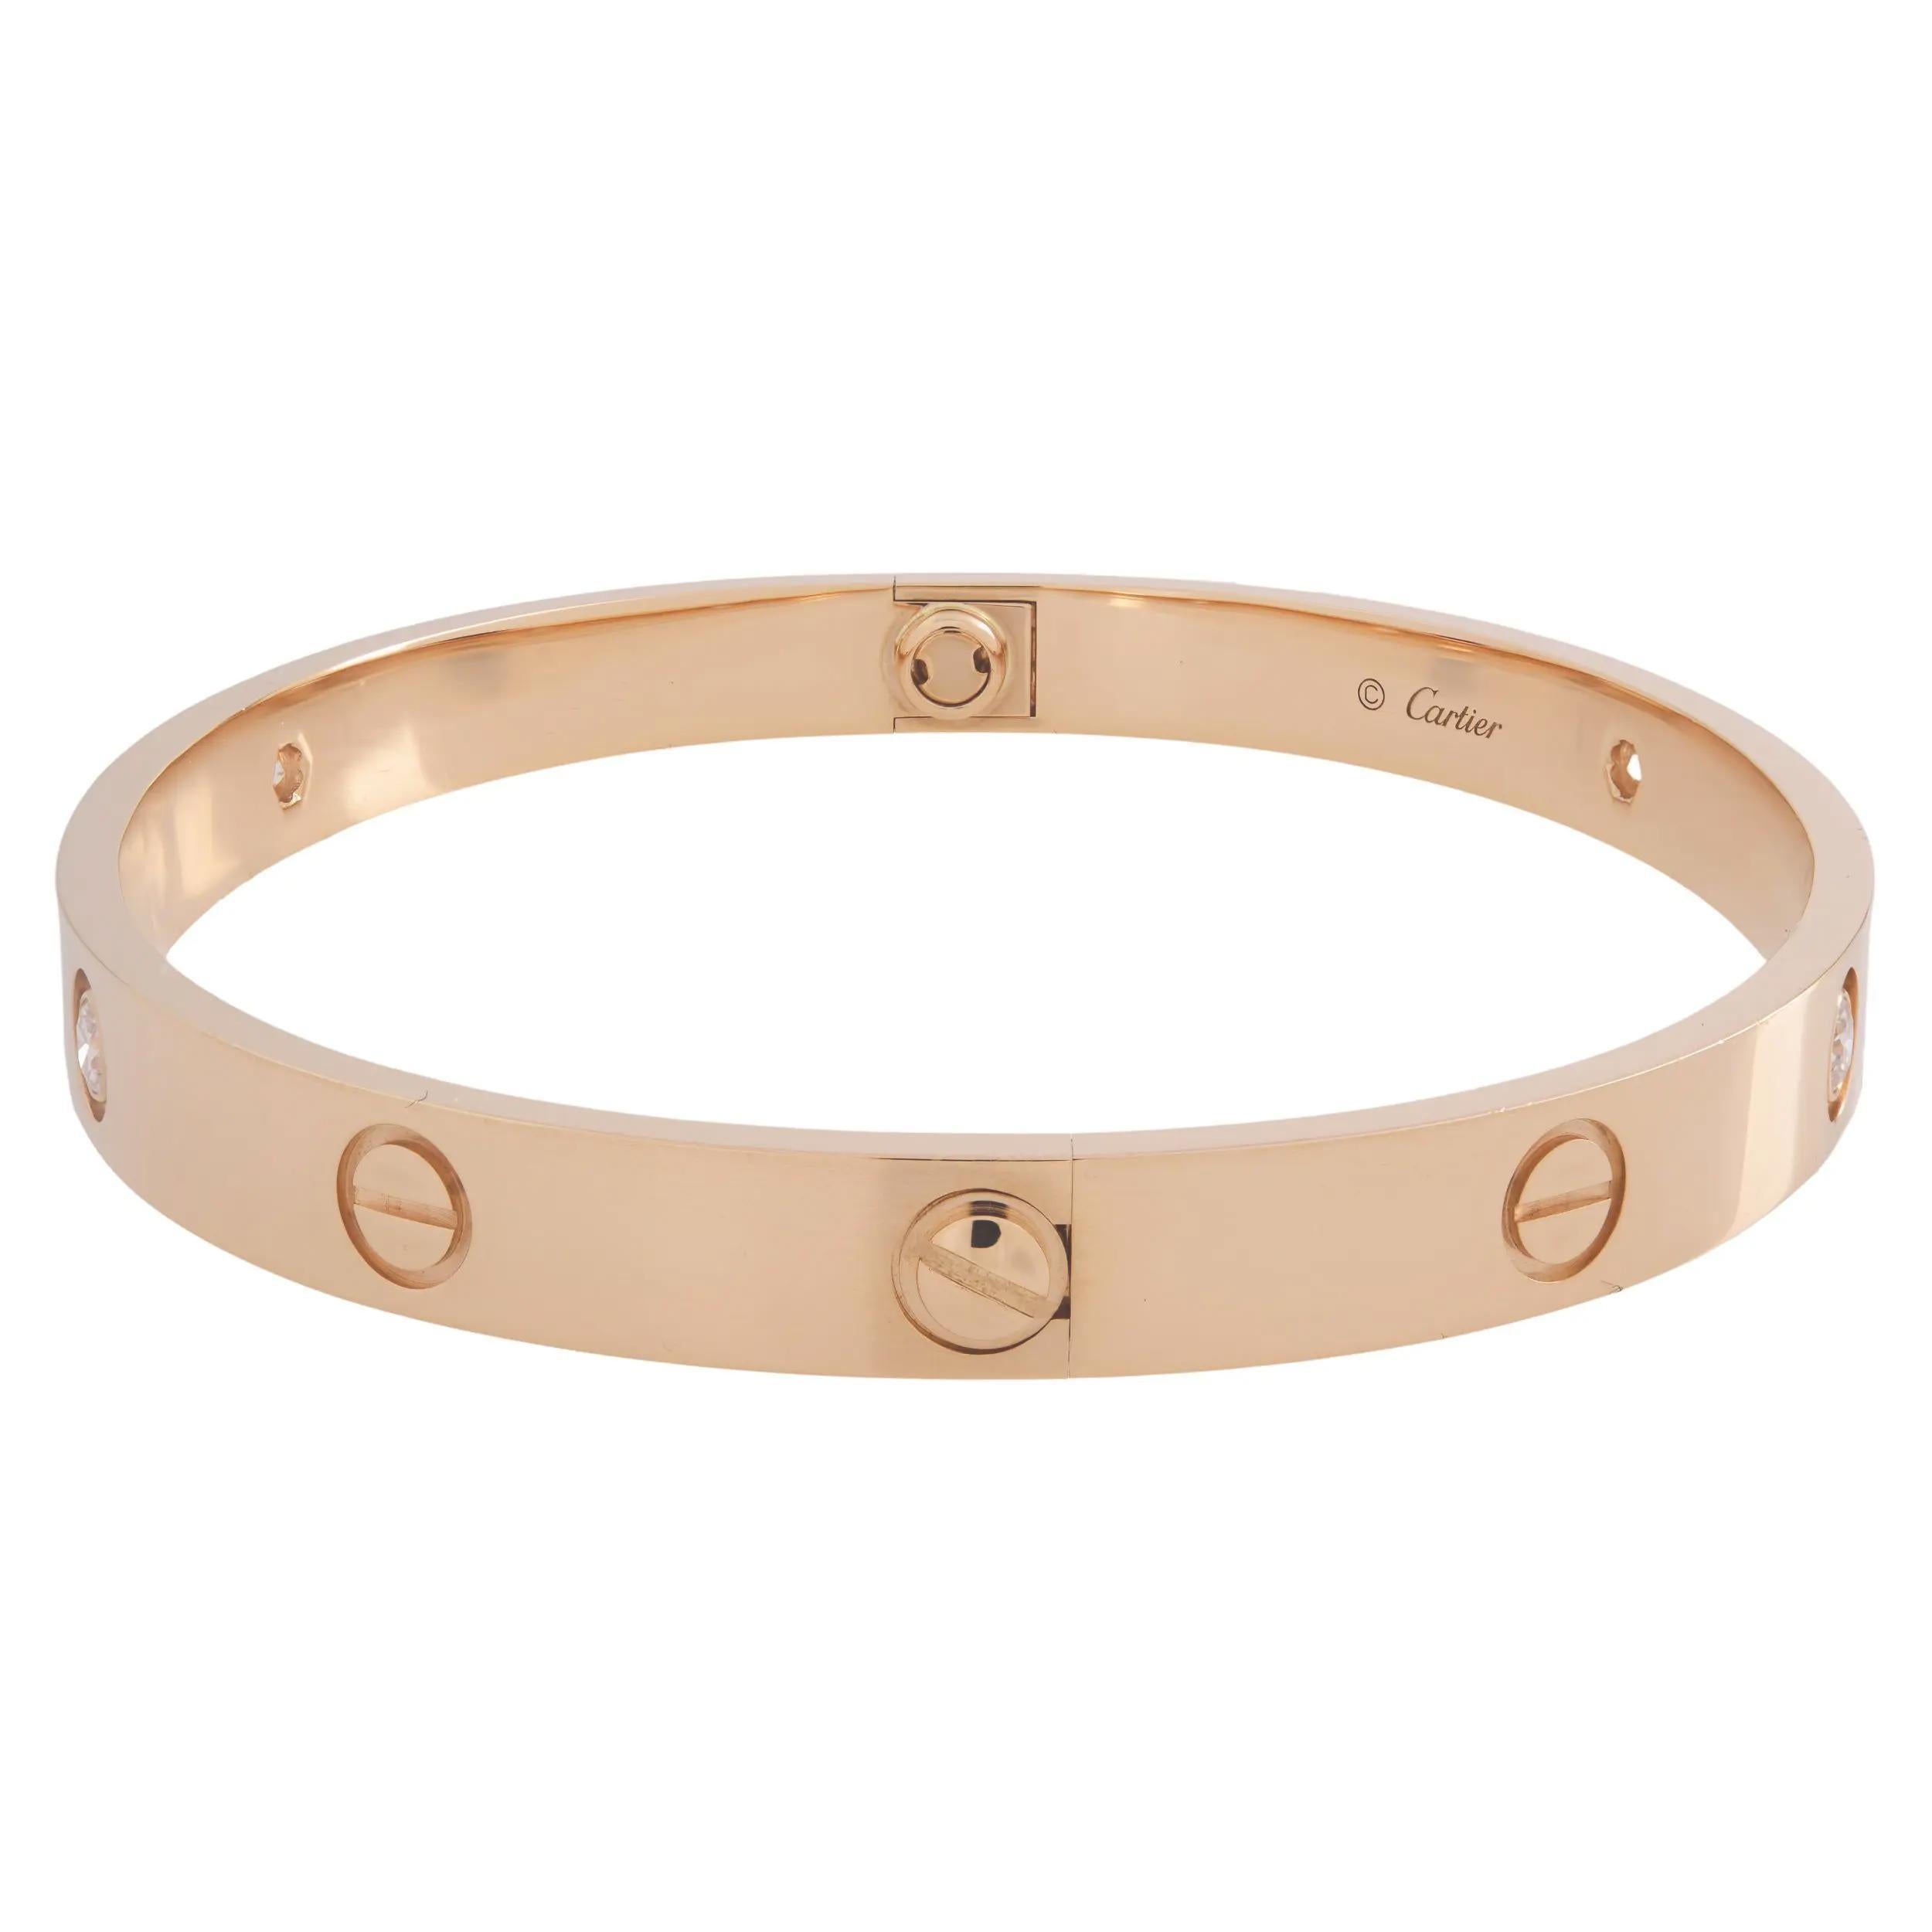 Cartier LOVE bracelet crafted in 18K Rose Gold, set with 4 round brilliant cut diamonds weighing 0.42 carats. A close-fitting, oval bracelet composed of two rigid arcs. New style screw system. Comes with a screwdriver. Width: 6.1mm. Size 19.